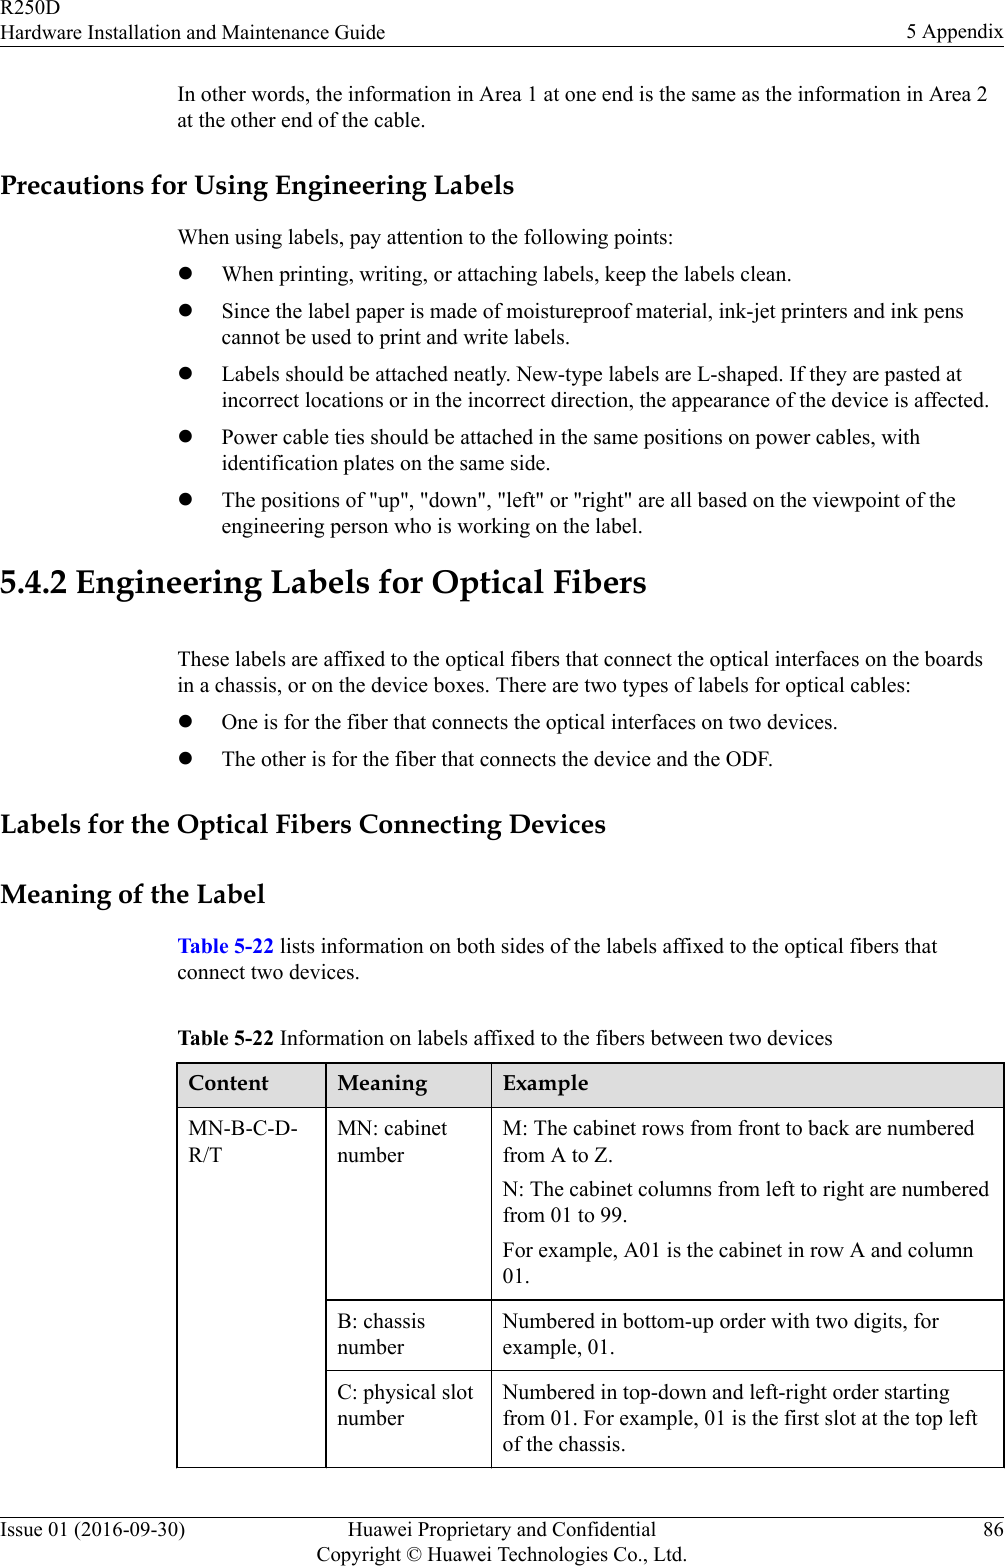 In other words, the information in Area 1 at one end is the same as the information in Area 2at the other end of the cable.Precautions for Using Engineering LabelsWhen using labels, pay attention to the following points:lWhen printing, writing, or attaching labels, keep the labels clean.lSince the label paper is made of moistureproof material, ink-jet printers and ink penscannot be used to print and write labels.lLabels should be attached neatly. New-type labels are L-shaped. If they are pasted atincorrect locations or in the incorrect direction, the appearance of the device is affected.lPower cable ties should be attached in the same positions on power cables, withidentification plates on the same side.lThe positions of &quot;up&quot;, &quot;down&quot;, &quot;left&quot; or &quot;right&quot; are all based on the viewpoint of theengineering person who is working on the label.5.4.2 Engineering Labels for Optical FibersThese labels are affixed to the optical fibers that connect the optical interfaces on the boardsin a chassis, or on the device boxes. There are two types of labels for optical cables:lOne is for the fiber that connects the optical interfaces on two devices.lThe other is for the fiber that connects the device and the ODF.Labels for the Optical Fibers Connecting DevicesMeaning of the LabelTable 5-22 lists information on both sides of the labels affixed to the optical fibers thatconnect two devices.Table 5-22 Information on labels affixed to the fibers between two devicesContent Meaning ExampleMN-B-C-D-R/TMN: cabinetnumberM: The cabinet rows from front to back are numberedfrom A to Z.N: The cabinet columns from left to right are numberedfrom 01 to 99.For example, A01 is the cabinet in row A and column01.B: chassisnumberNumbered in bottom-up order with two digits, forexample, 01.C: physical slotnumberNumbered in top-down and left-right order startingfrom 01. For example, 01 is the first slot at the top leftof the chassis.R250DHardware Installation and Maintenance Guide 5 AppendixIssue 01 (2016-09-30) Huawei Proprietary and ConfidentialCopyright © Huawei Technologies Co., Ltd.86